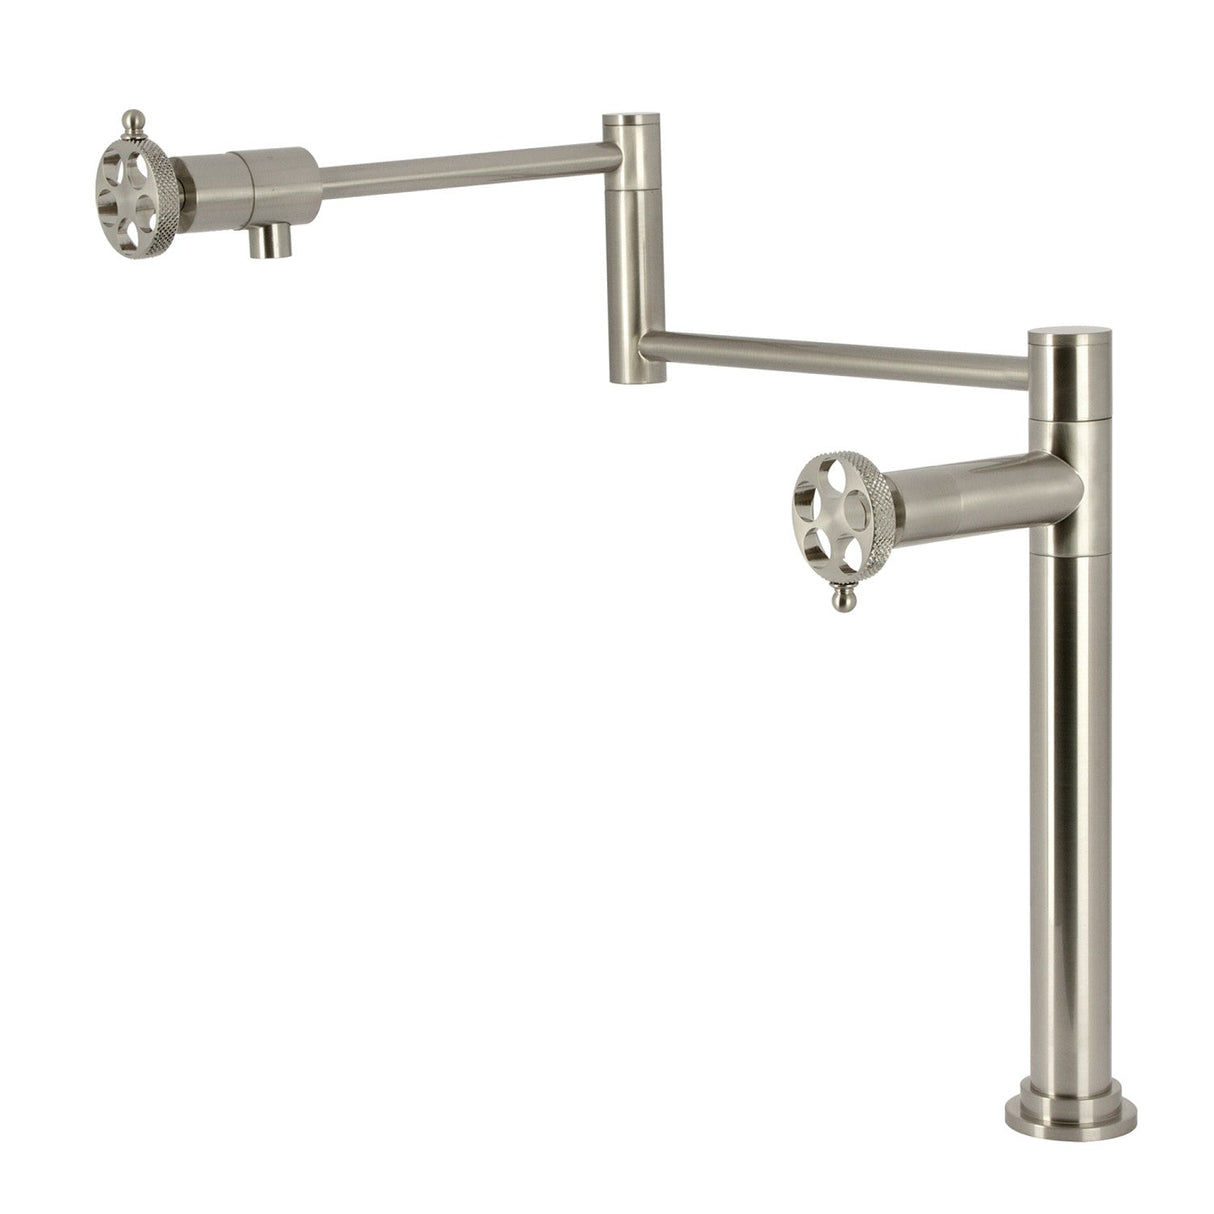 Webb KS4708RKX Two-Handle 1-Hole Deck Mount Pot Filler Faucet with Knurled Handle, Brushed Nickel